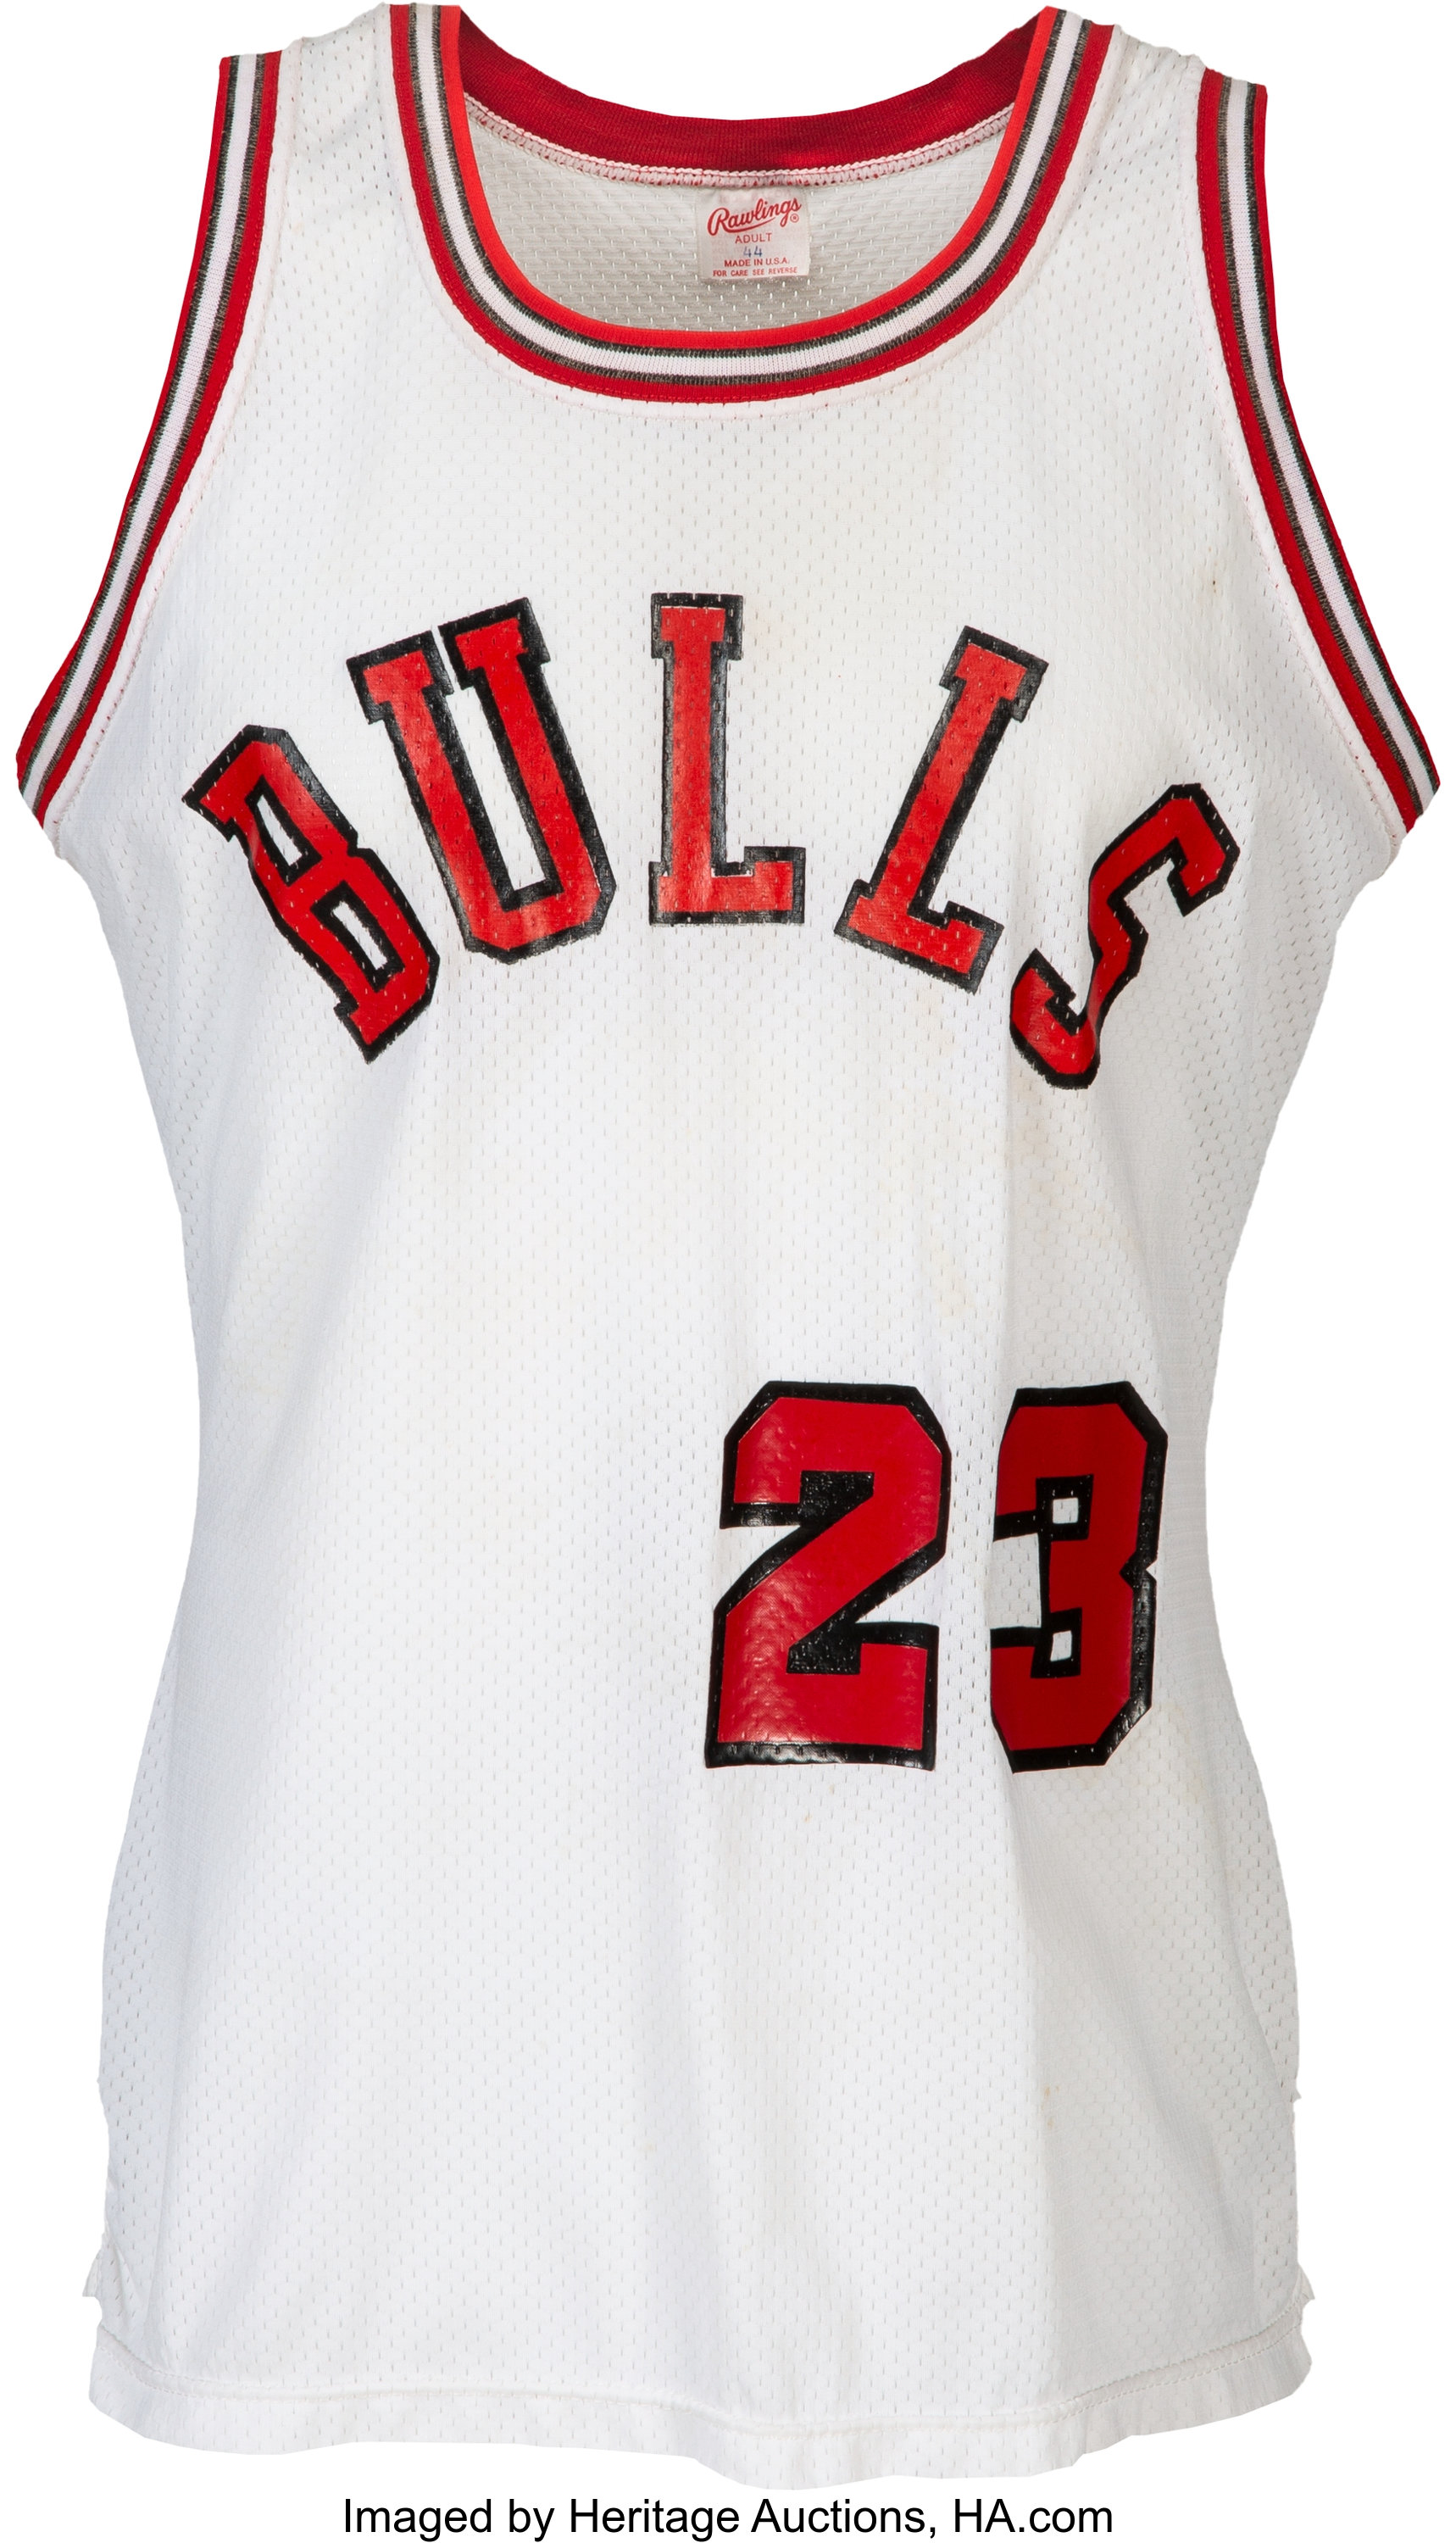 Chicago Bulls - What was the first Bulls jersey you owned?